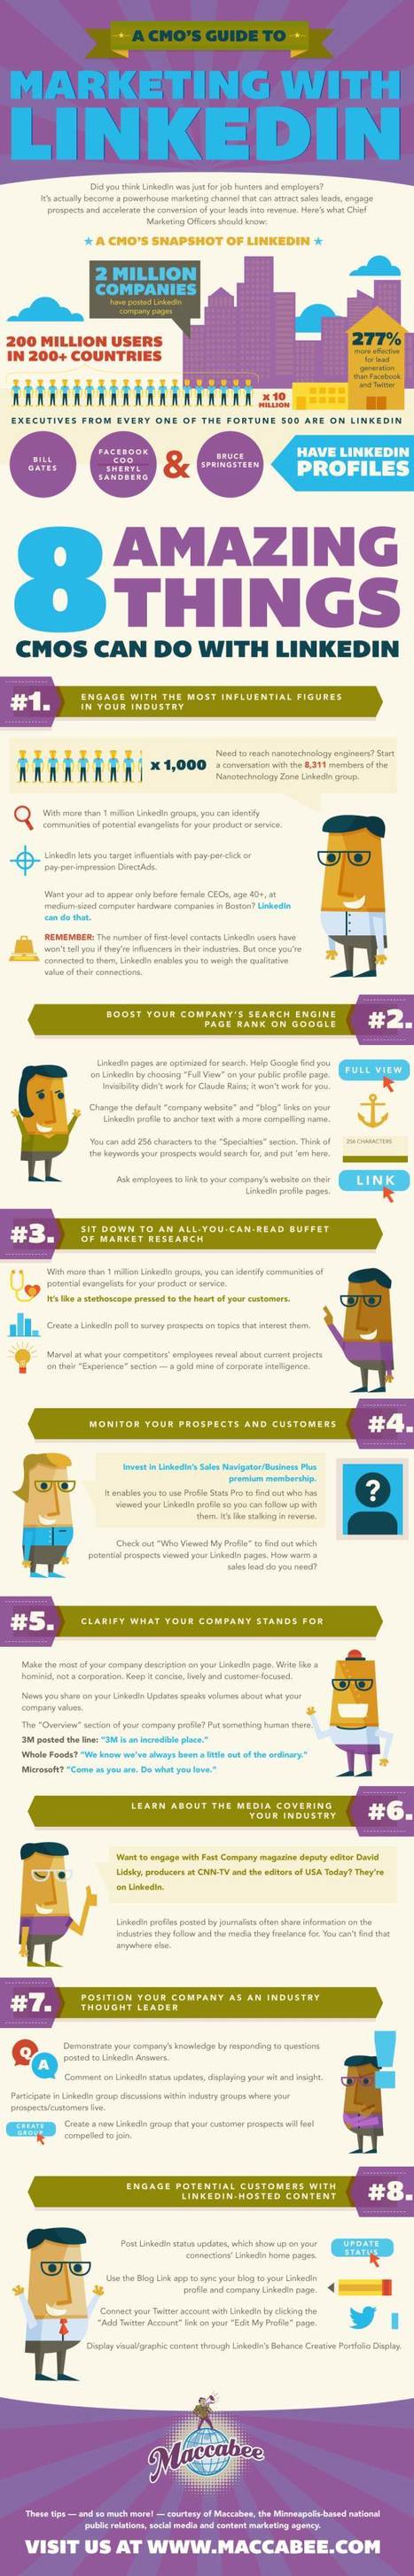 Infographic: 8 amazing things marketers can do using LinkedIn - The Hub | The MarTech Digest | Scoop.it